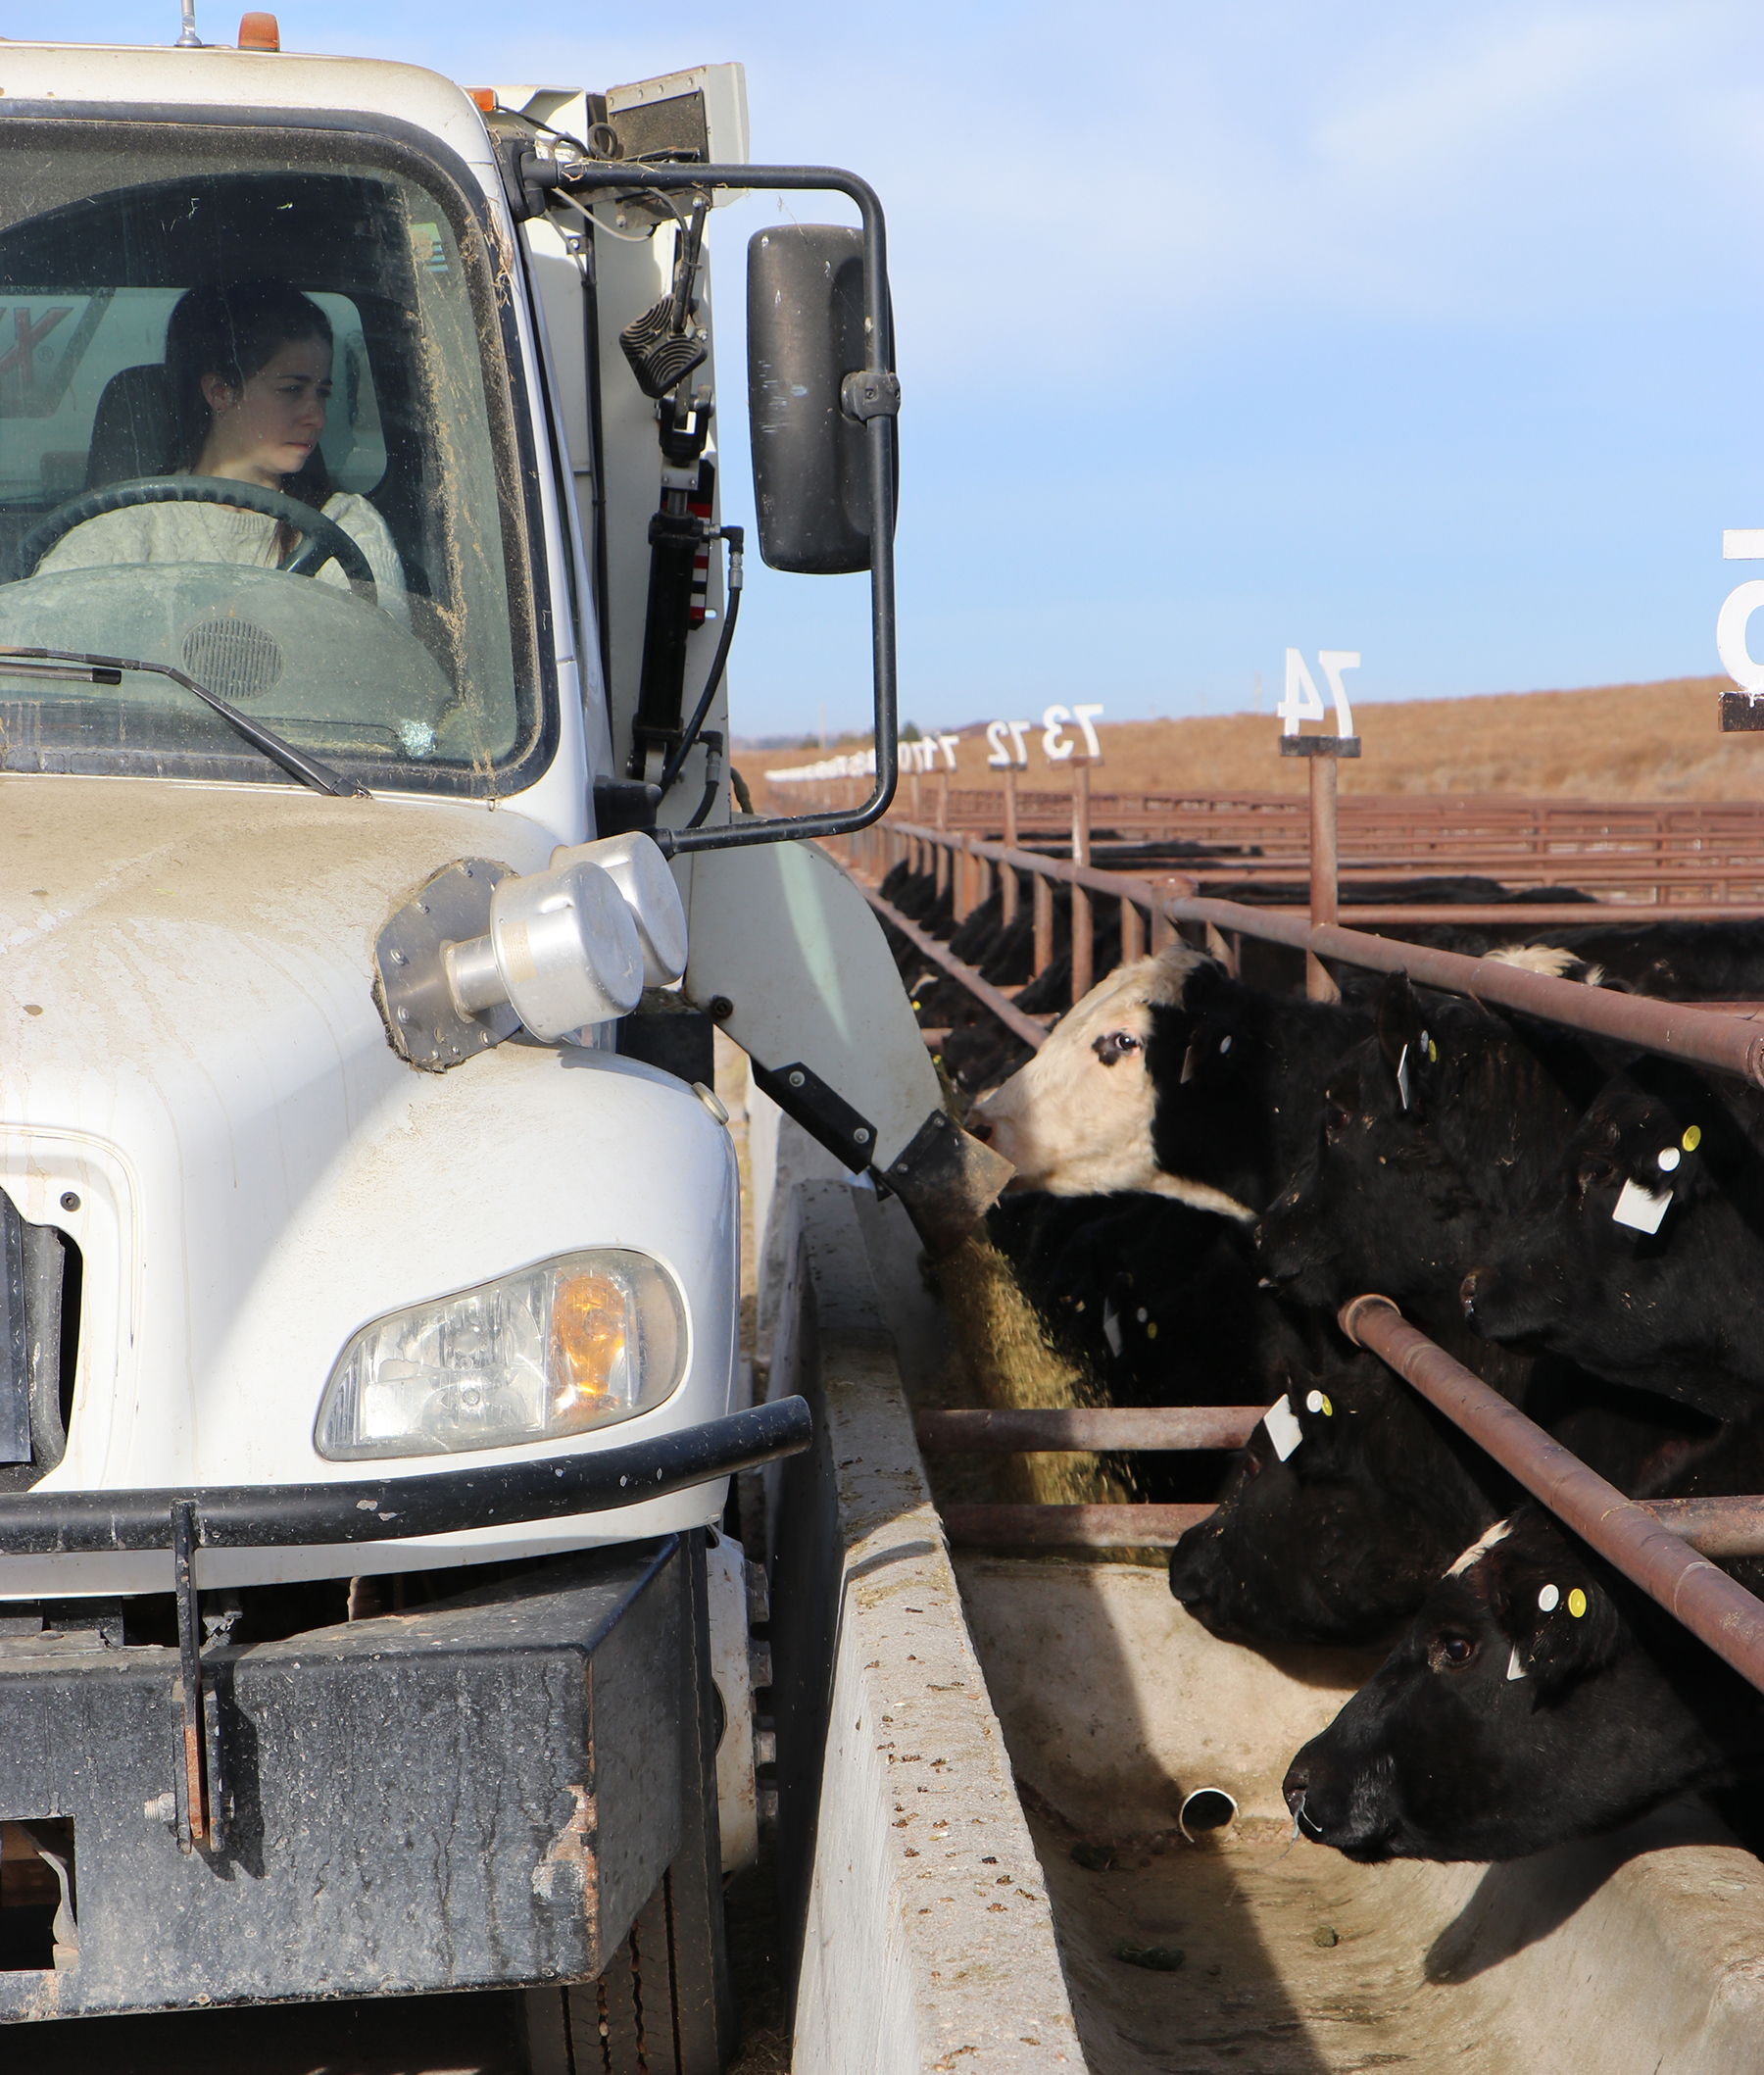 Cattle at the University of Nebraska-Lincoln Panhandle Research Feedlot wait for their feed rations from a truck driven by Sofia Canafoglia, a visiting scholar. (Photo by Chabella Guzman.)